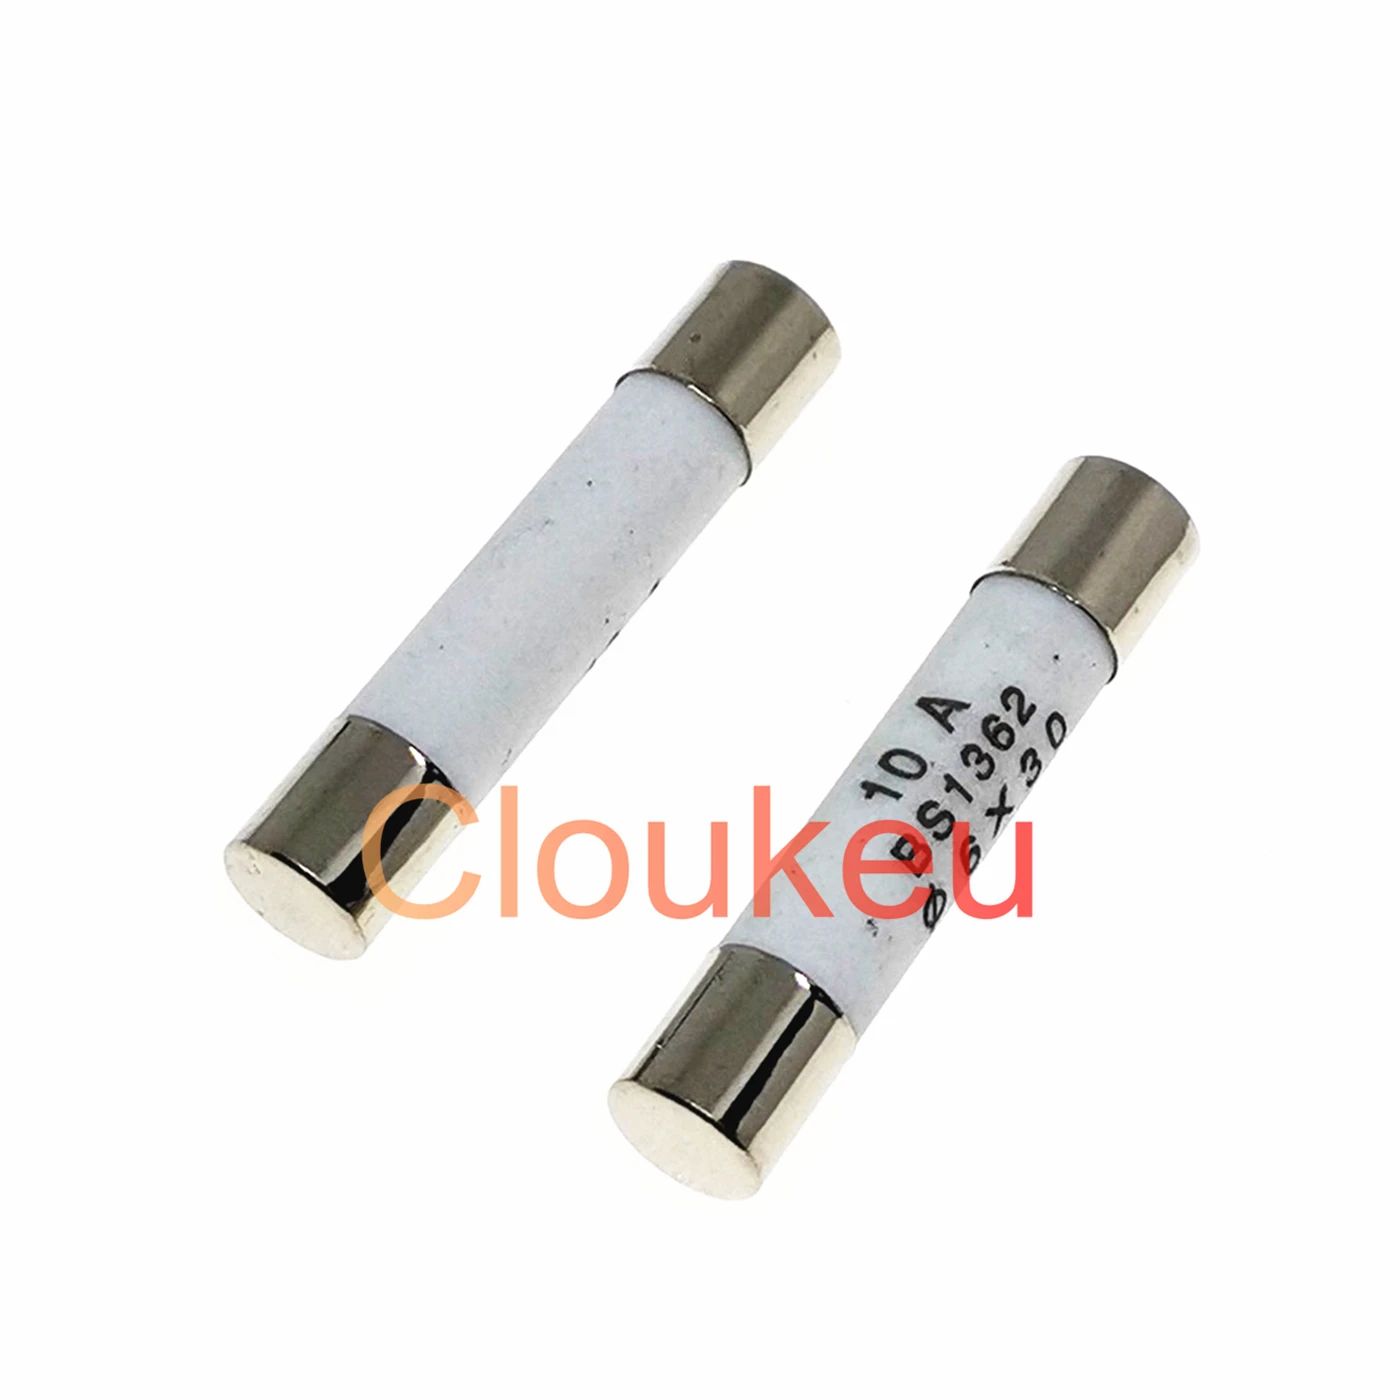 6mmx30mm Electrical Ceramic Fast Quick Blow Fuses 0.75A-30A Amp 250V AC 